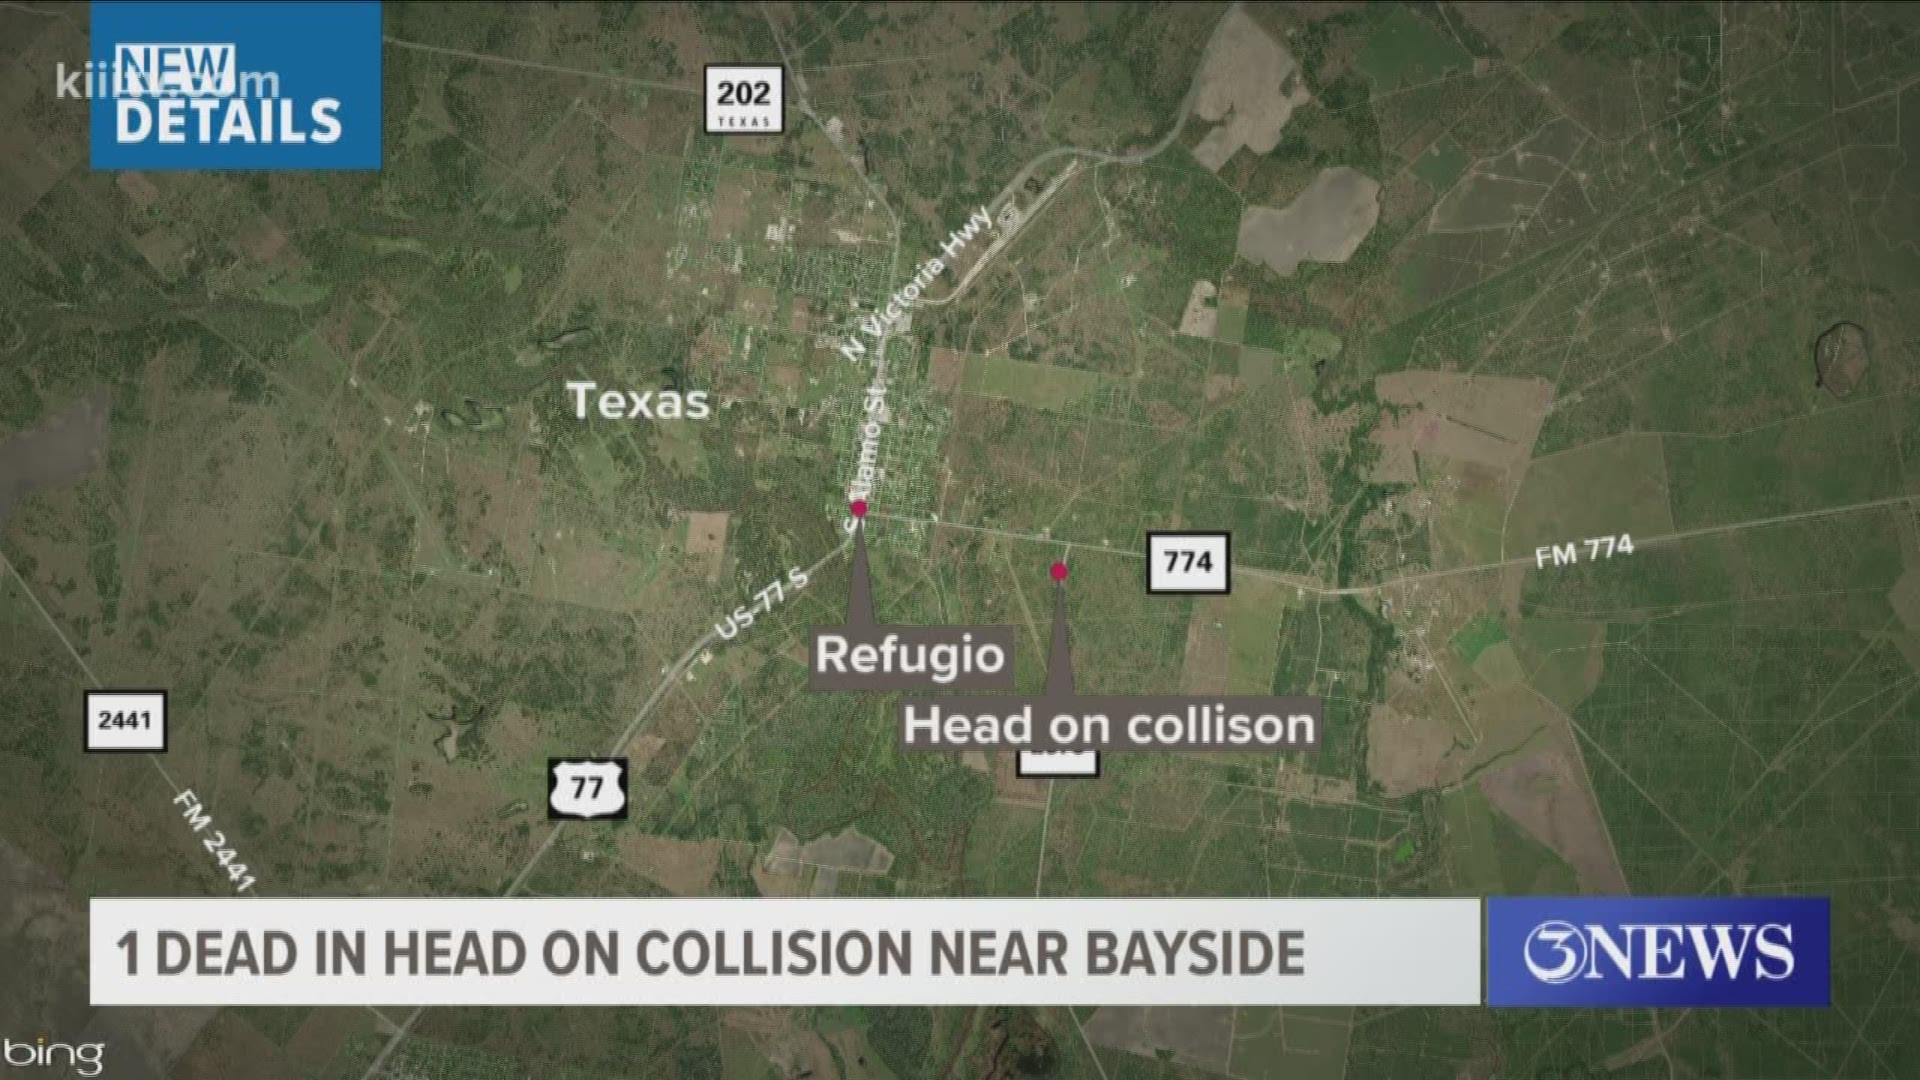 On Saturday, DPS released more details about a fatal car crash that happened near Bayside.